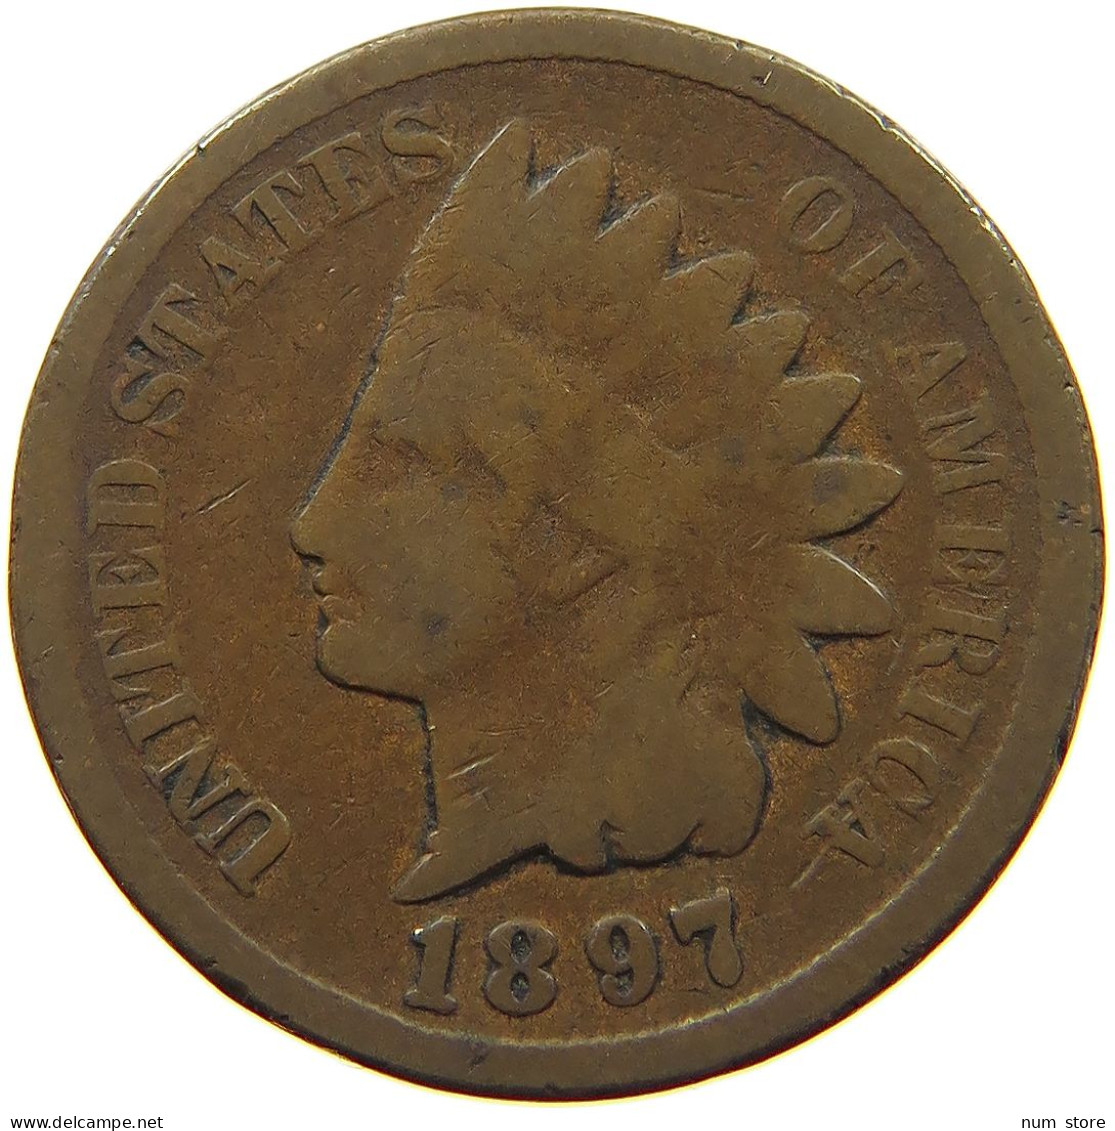 UNITED STATES OF AMERICA CENT 1897 INDIAN HEAD #s063 0217 - 1859-1909: Indian Head